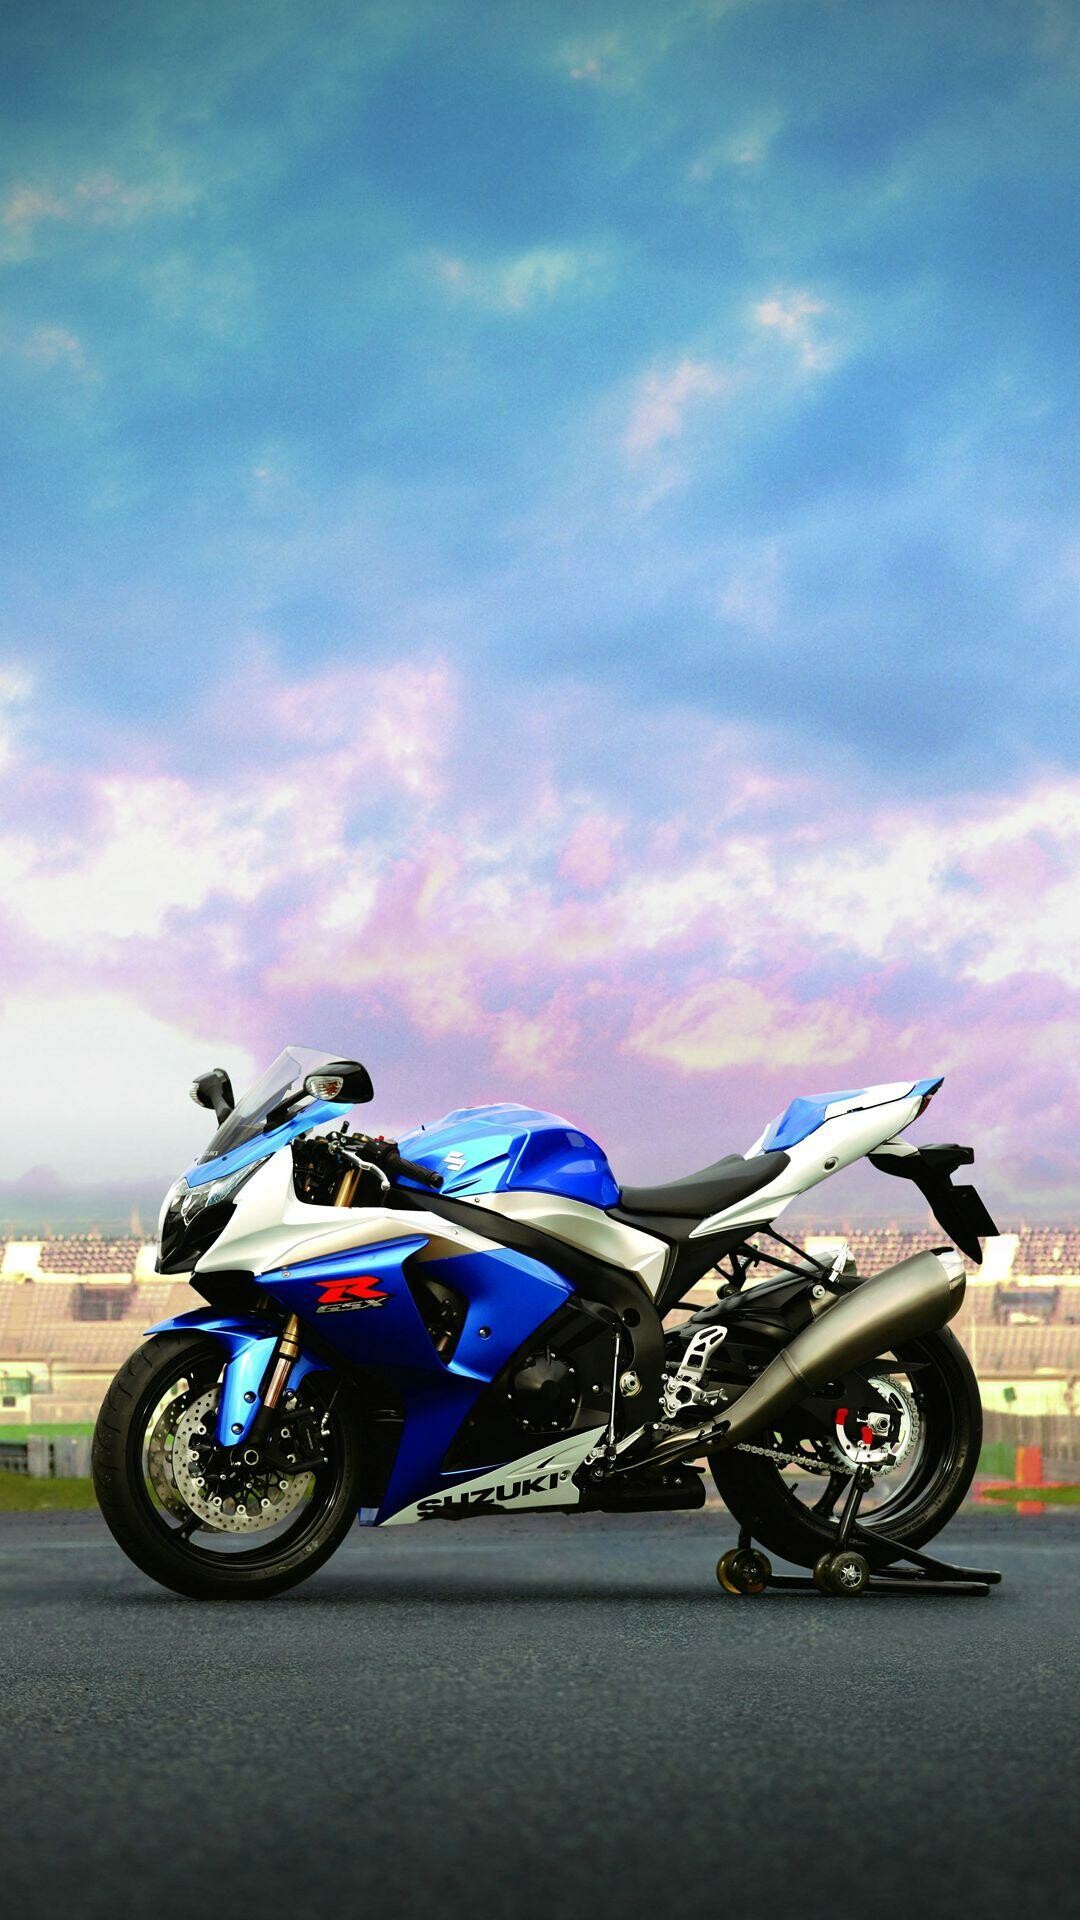 GSX-R: The first single-cylinder Gixxer, the 125 cc (7.6 cu in) 125 model was introduced at the 2016 Intermot. 1080x1920 Full HD Background.